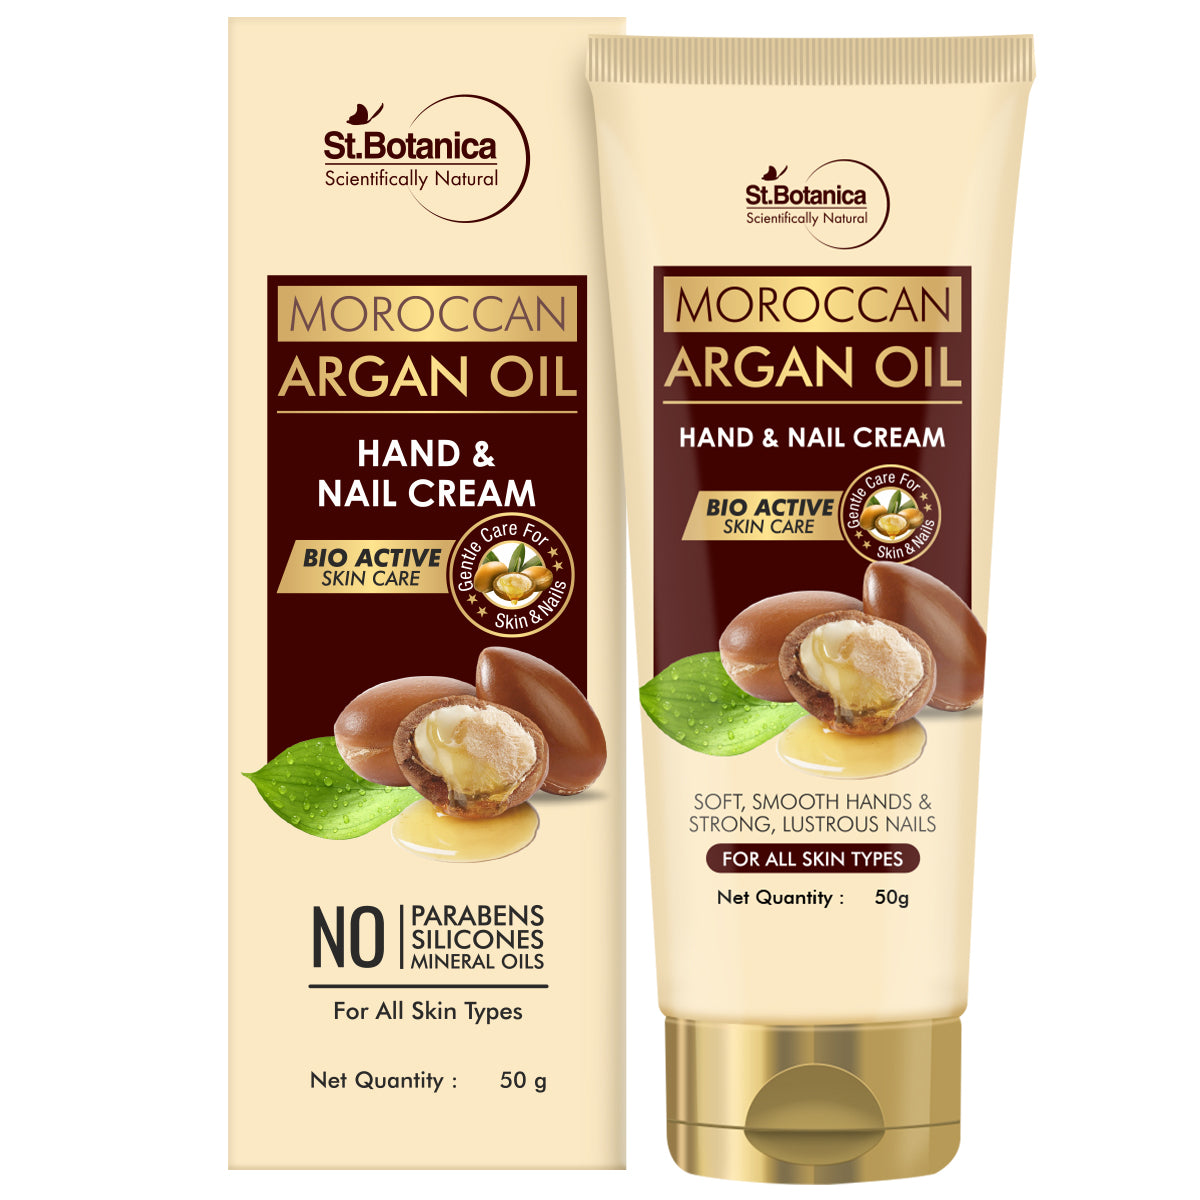 St.Botanica Moroccan Argan Oil Hand and Nail Cream, For Soft, Smooth Hands & Strong Lustrous Nails, 50 g (STBOT557)